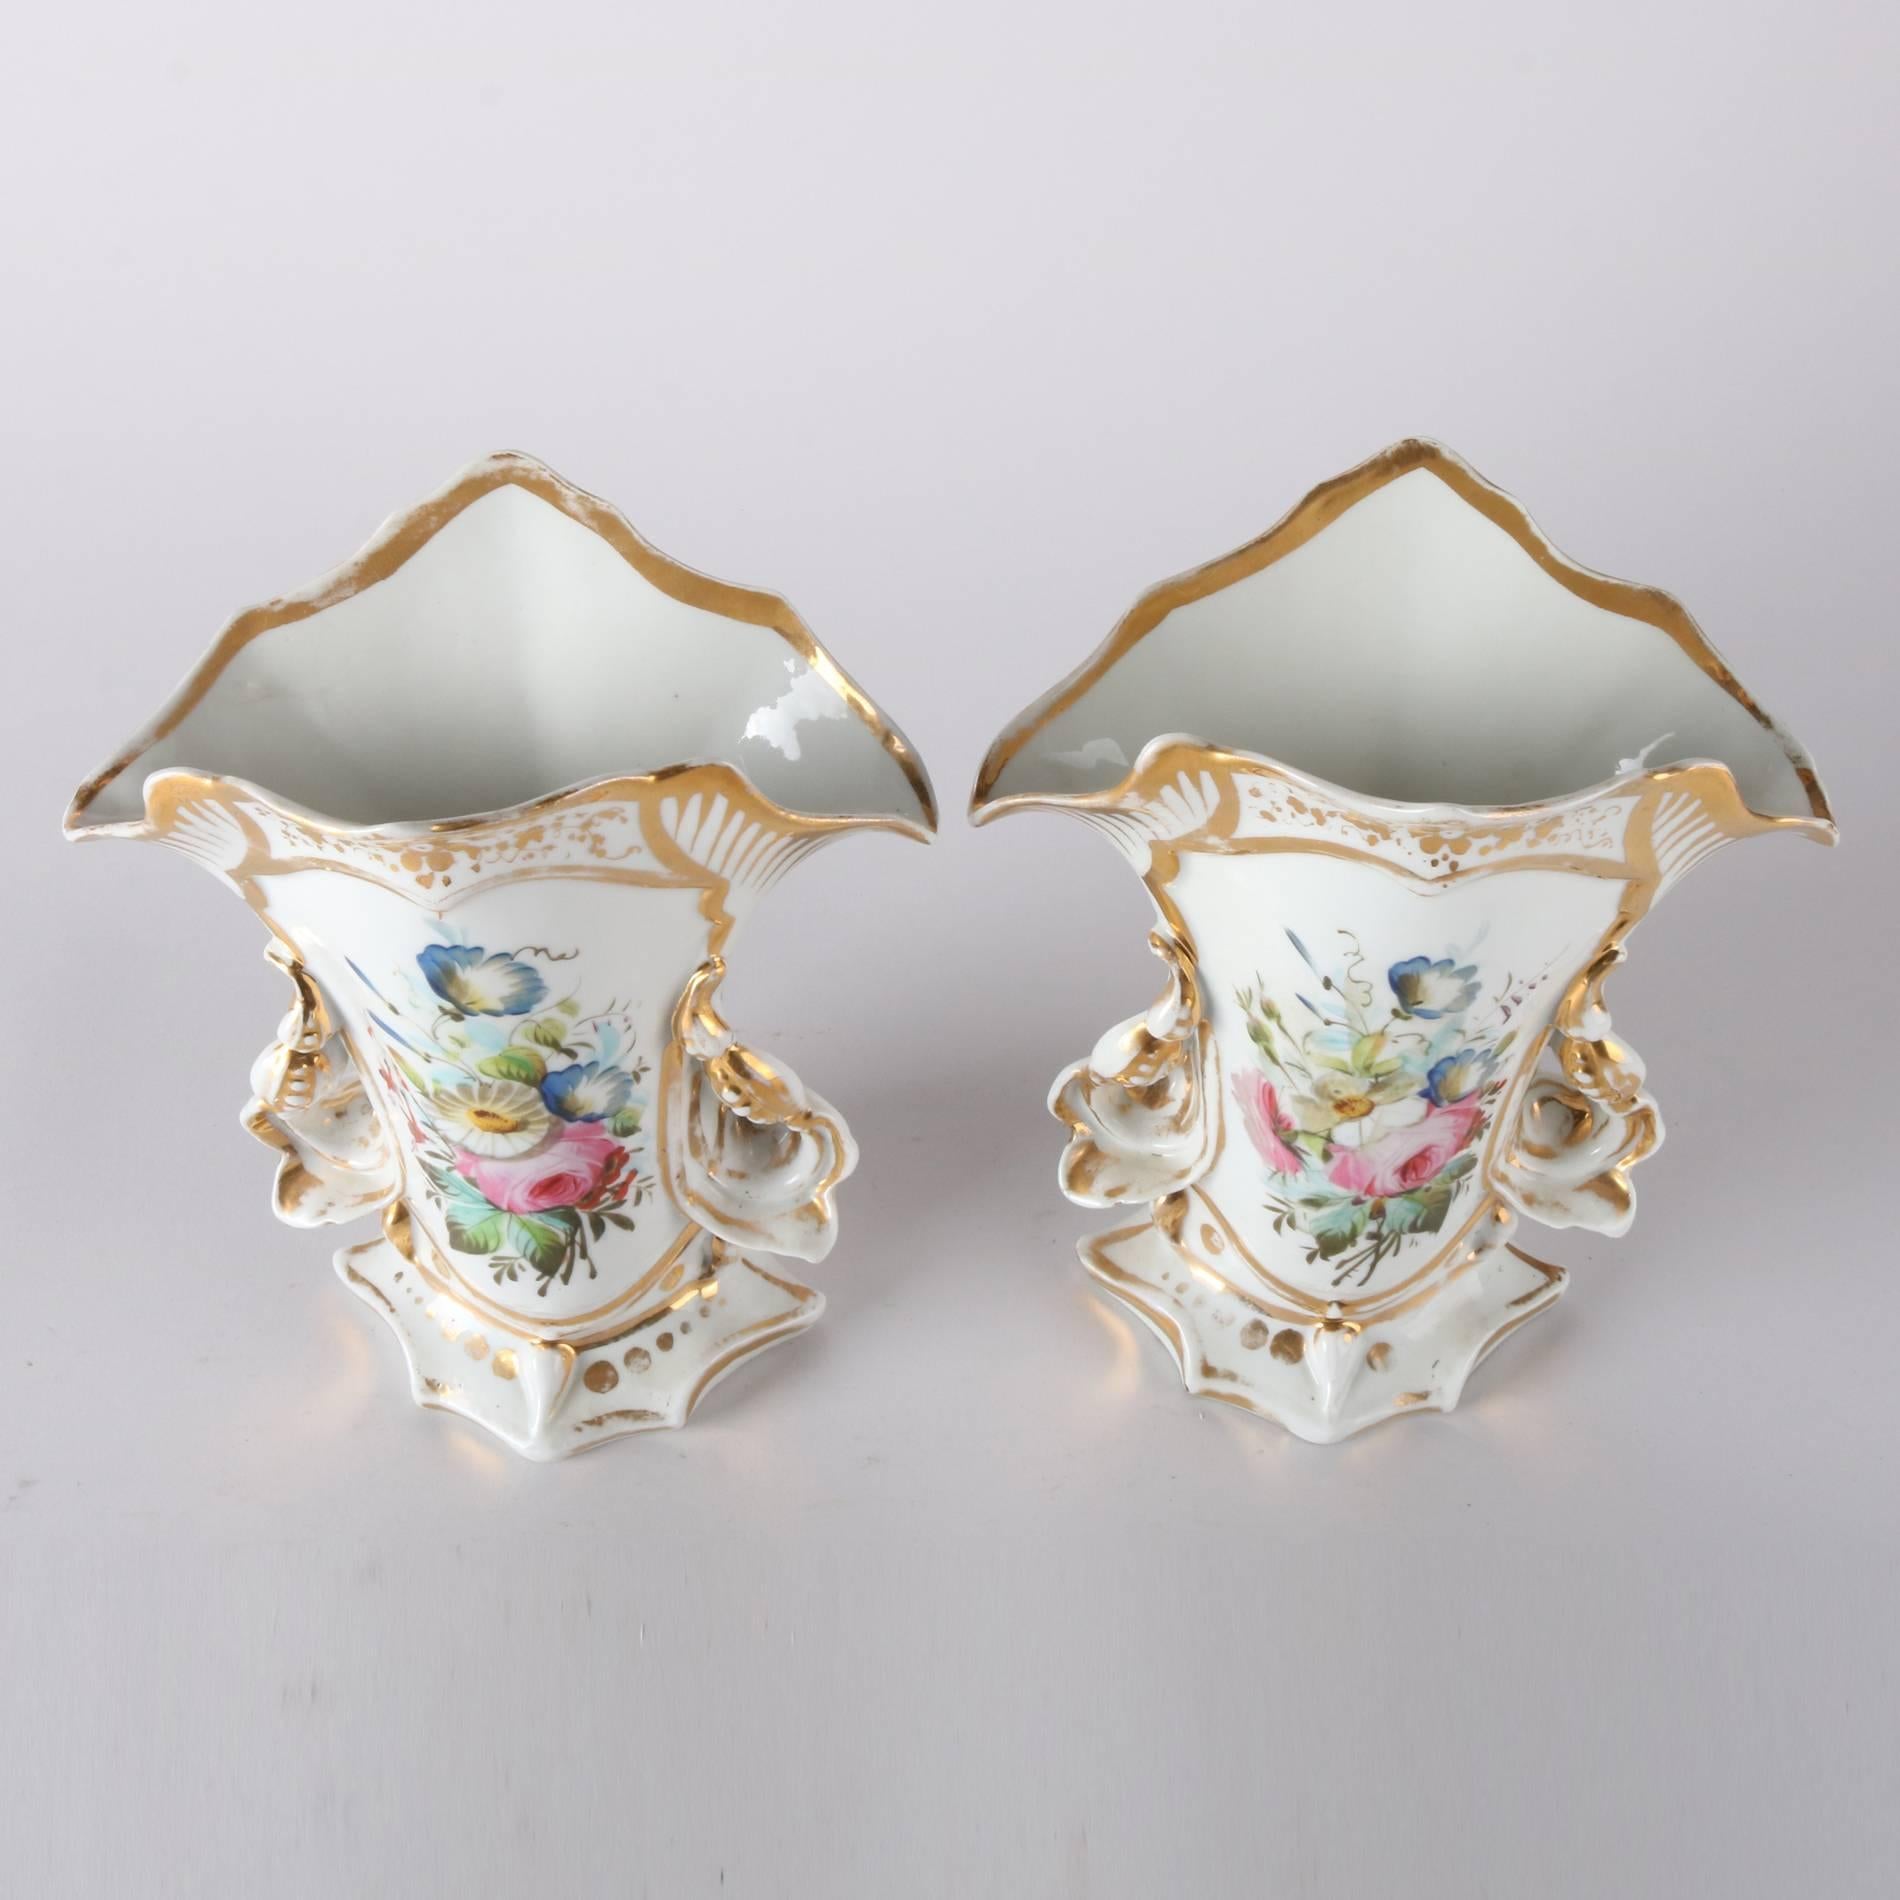 Pair of Antique French Old Paris Hand-Painted & Gilt Handled Spill Vases 3